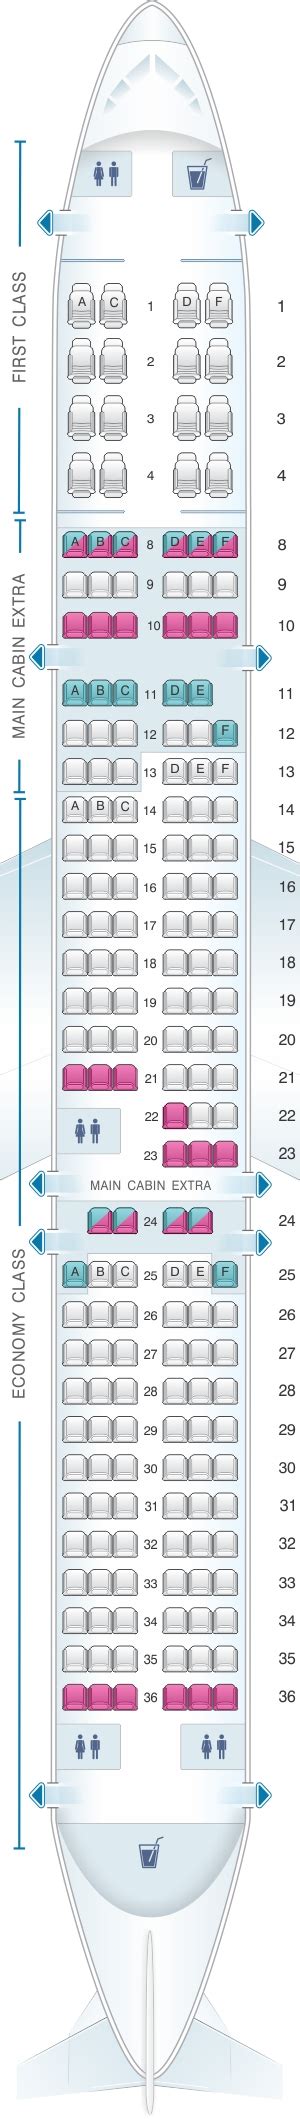 Photos American Airlines A First Class Seating Chart And Hot Sex